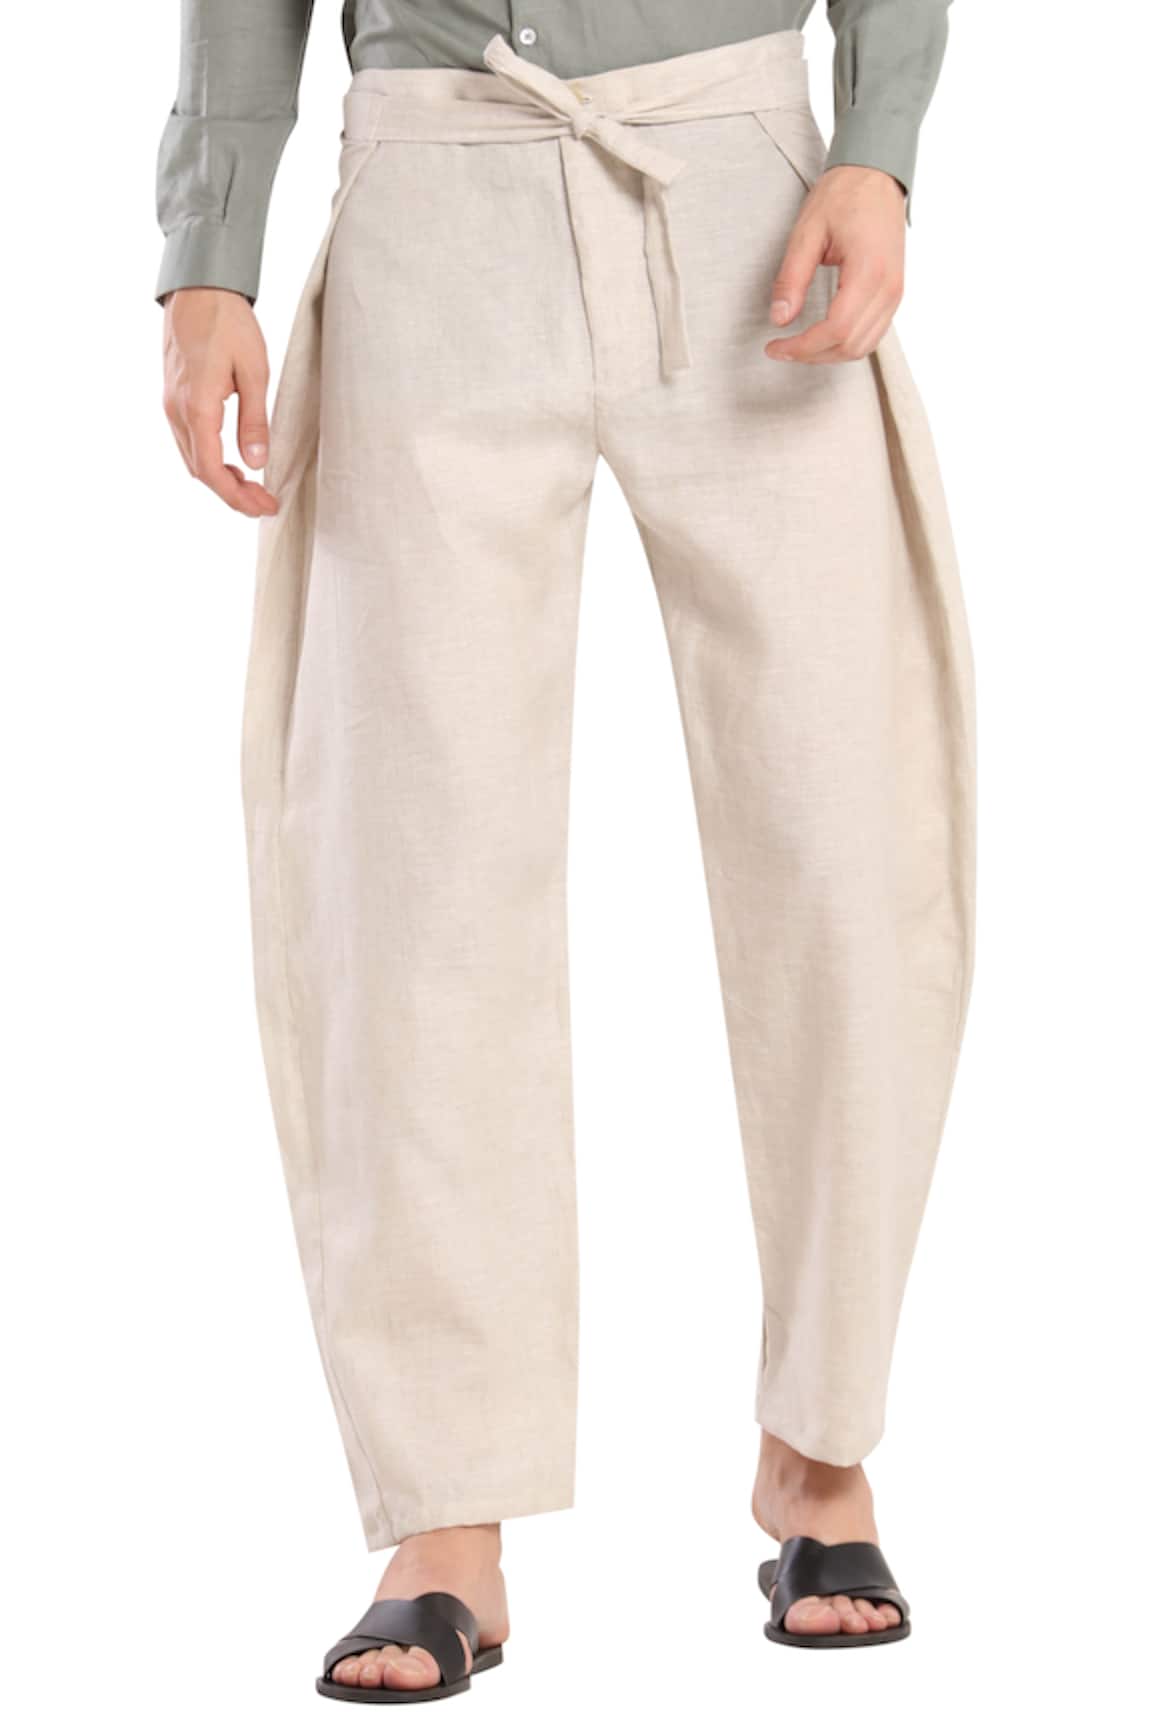 Buy Ivory White Linen Trouser for Men  Beyours  Page 6